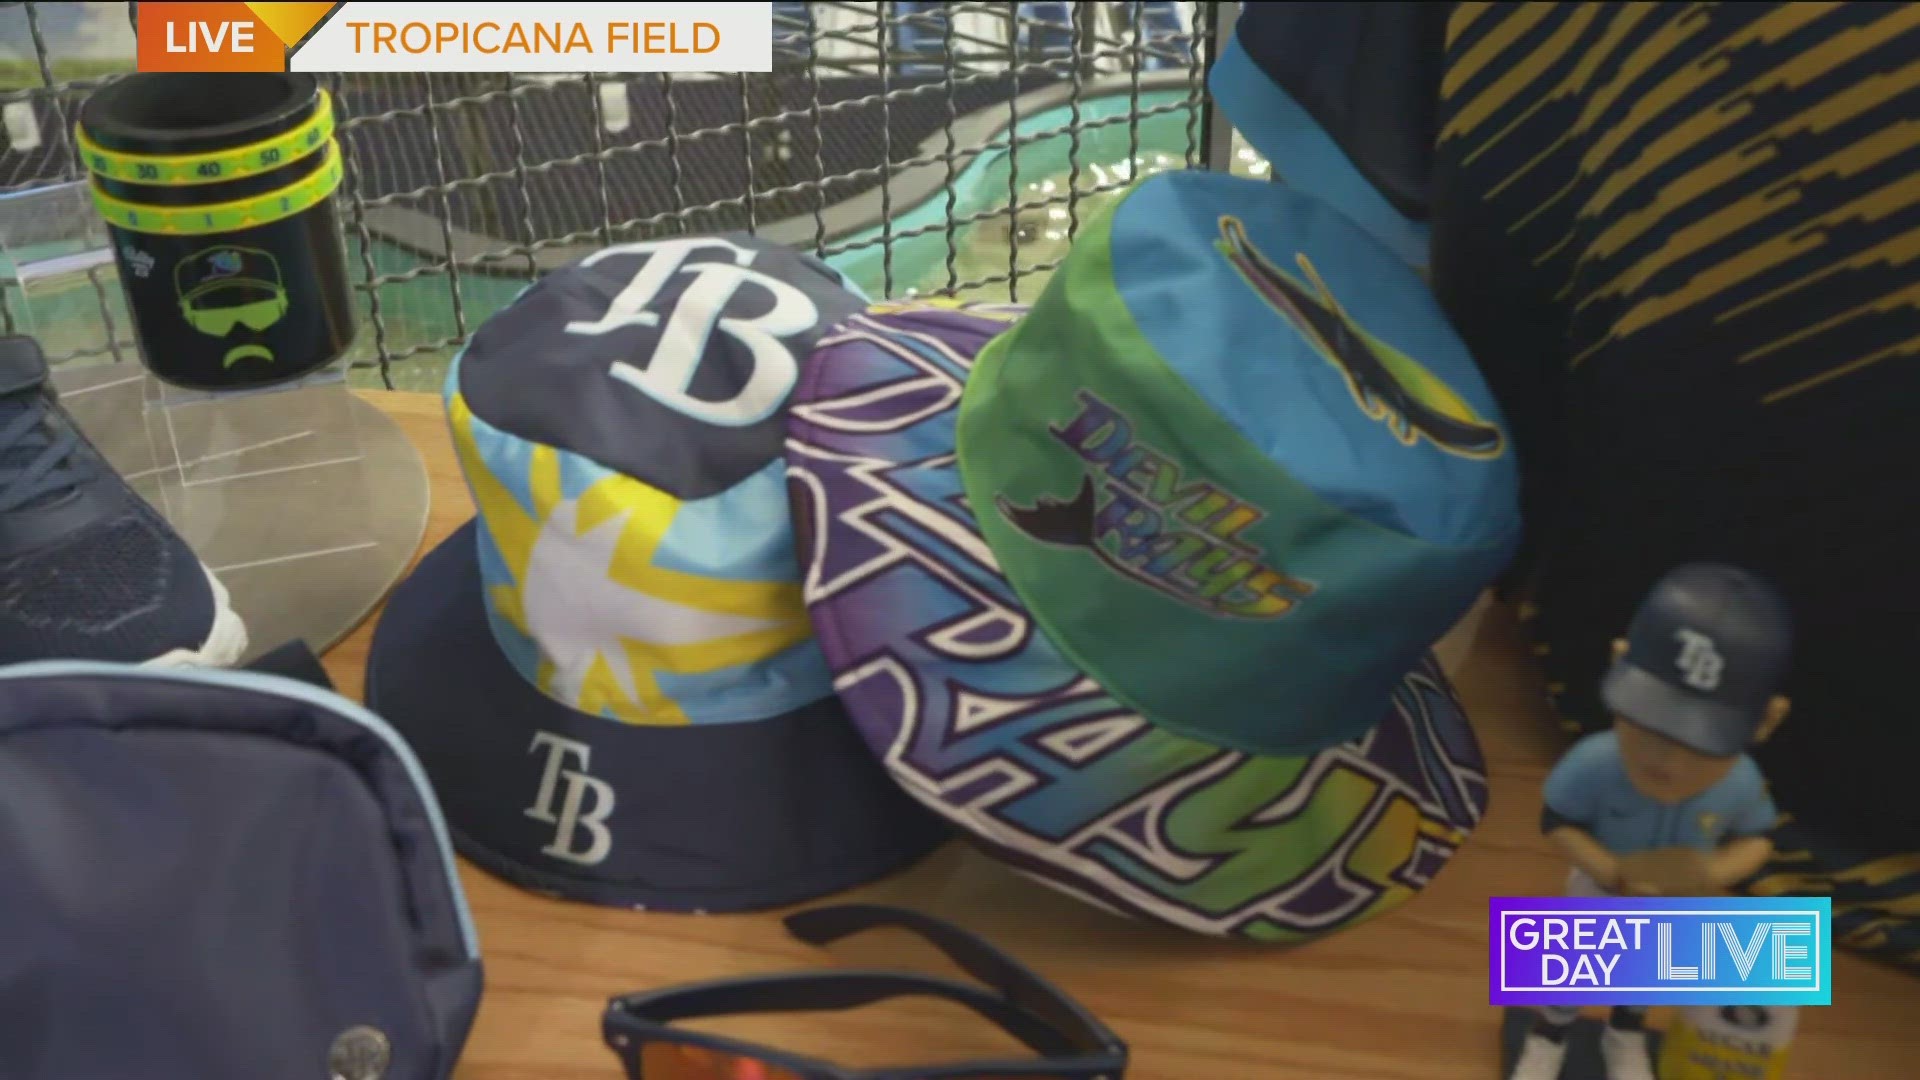 Tampa Bay Rays Rookies Kids Club for Little Rays Fans!